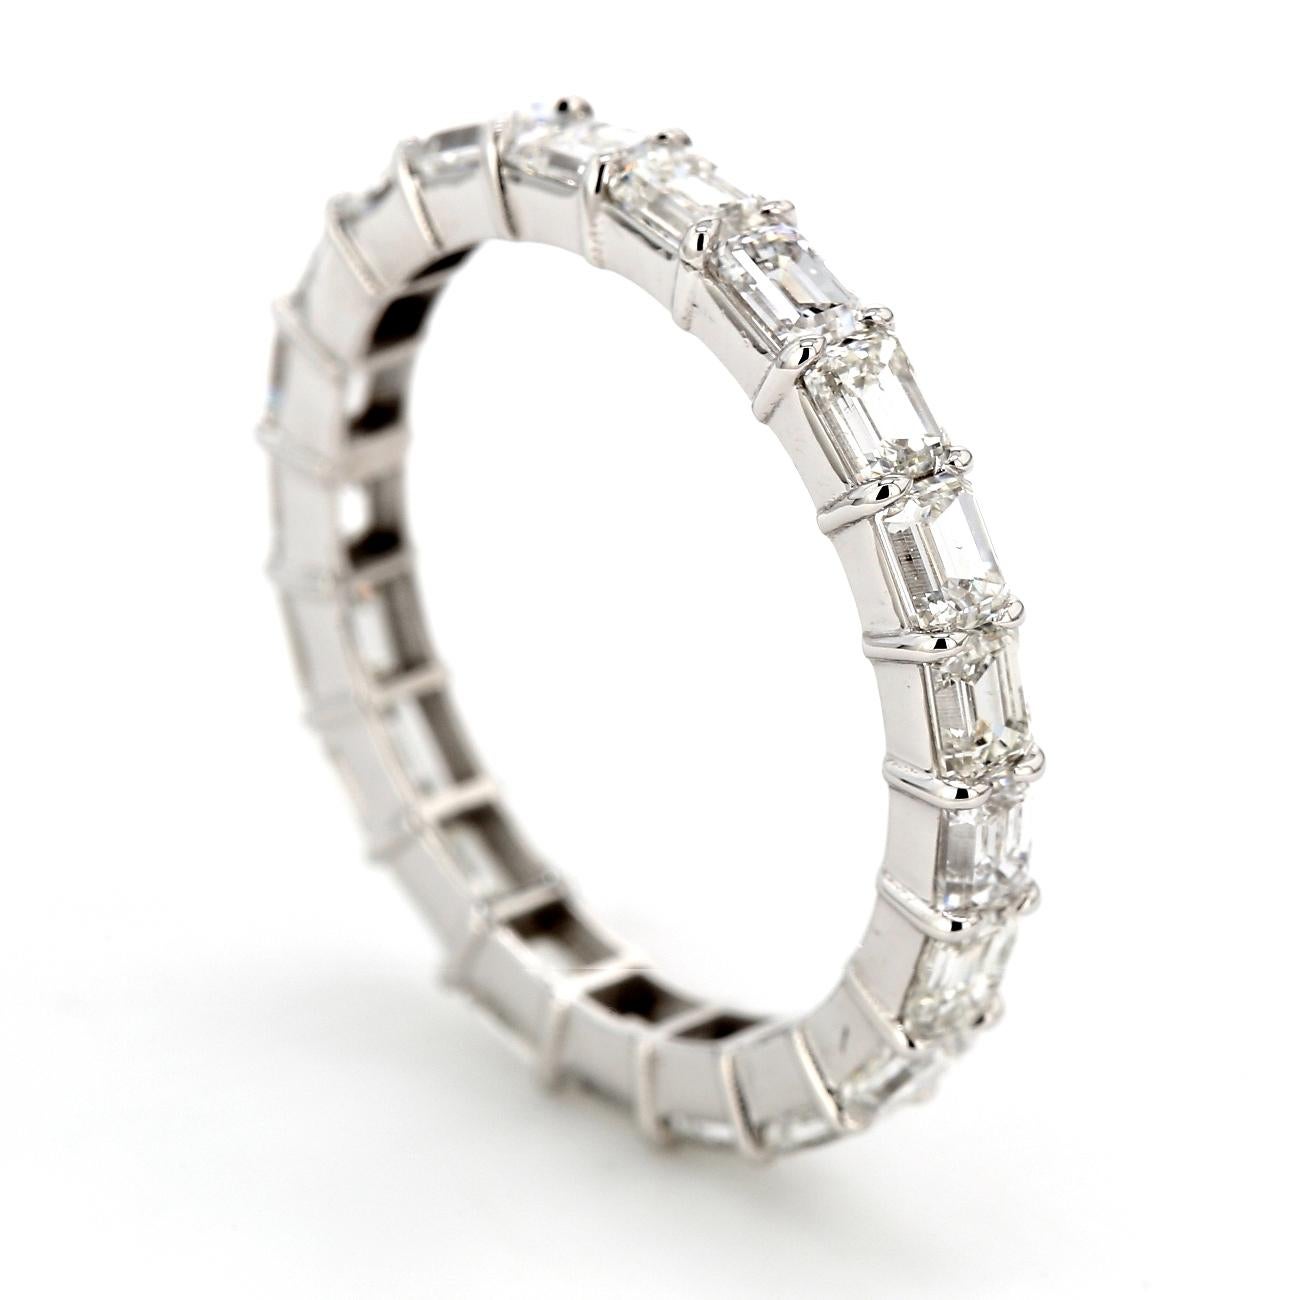 East-west style eternity band in 14K white gold with shared prong set emerald cut diamonds. D2.88ct.t.w.